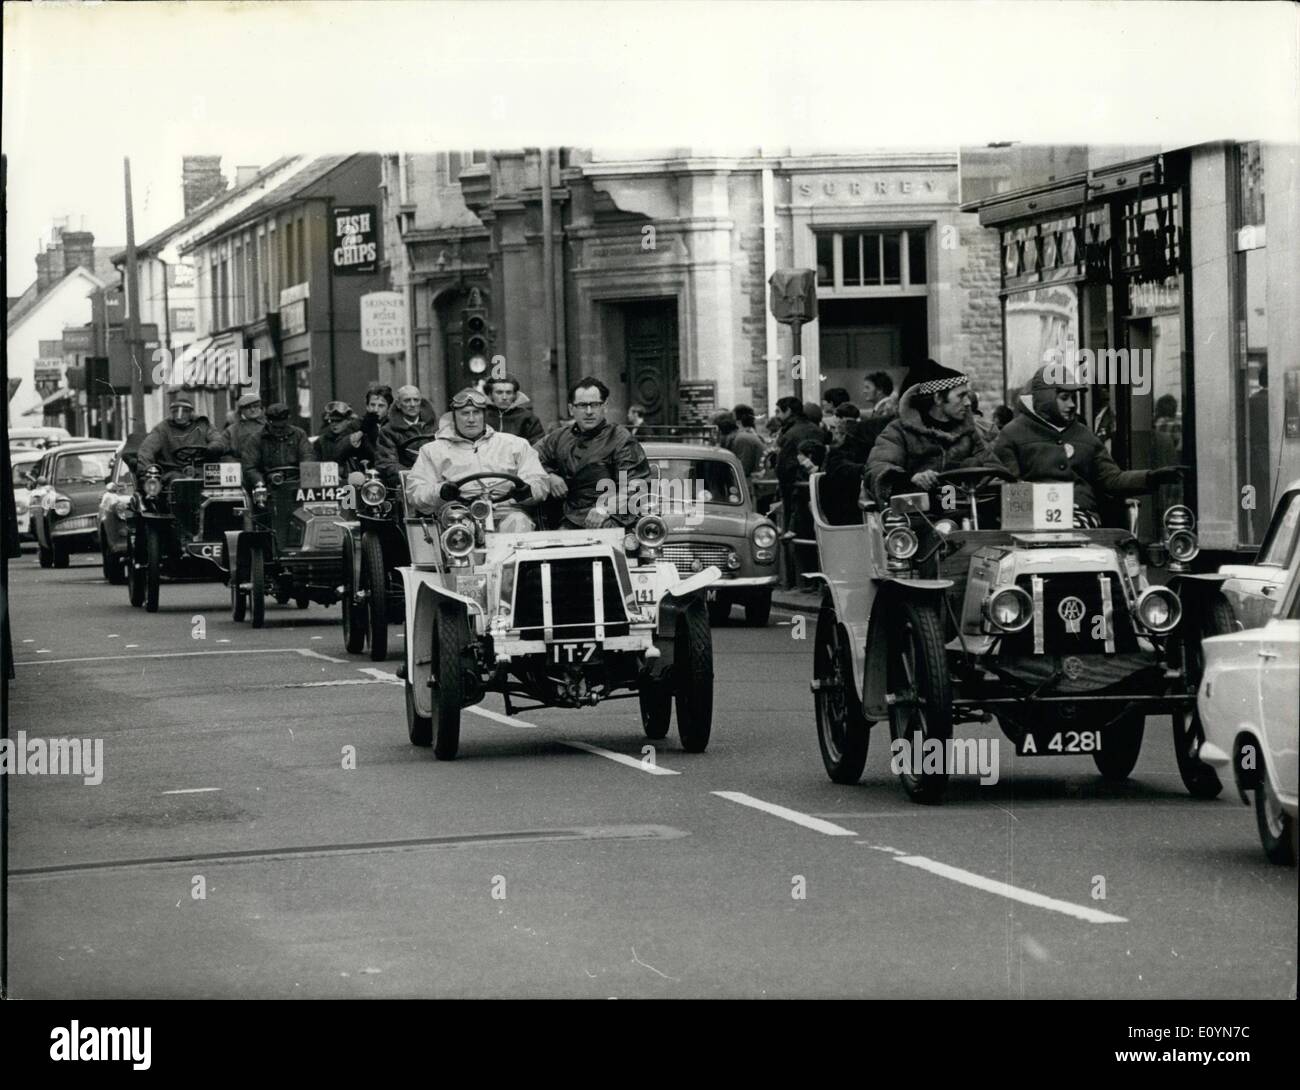 Nov. 11, 1970 - Veteran car run to Brighton; The annual Veteran Car run from London tod Brighton took place yesterday and here are some of the same nearly half way there as they pass through Redhill. The leading car is a 1901 Panhard Lavasser followed by a 1903 Darraqu a 1903 Napoleon and a 1903 Gladiator. Stock Photo